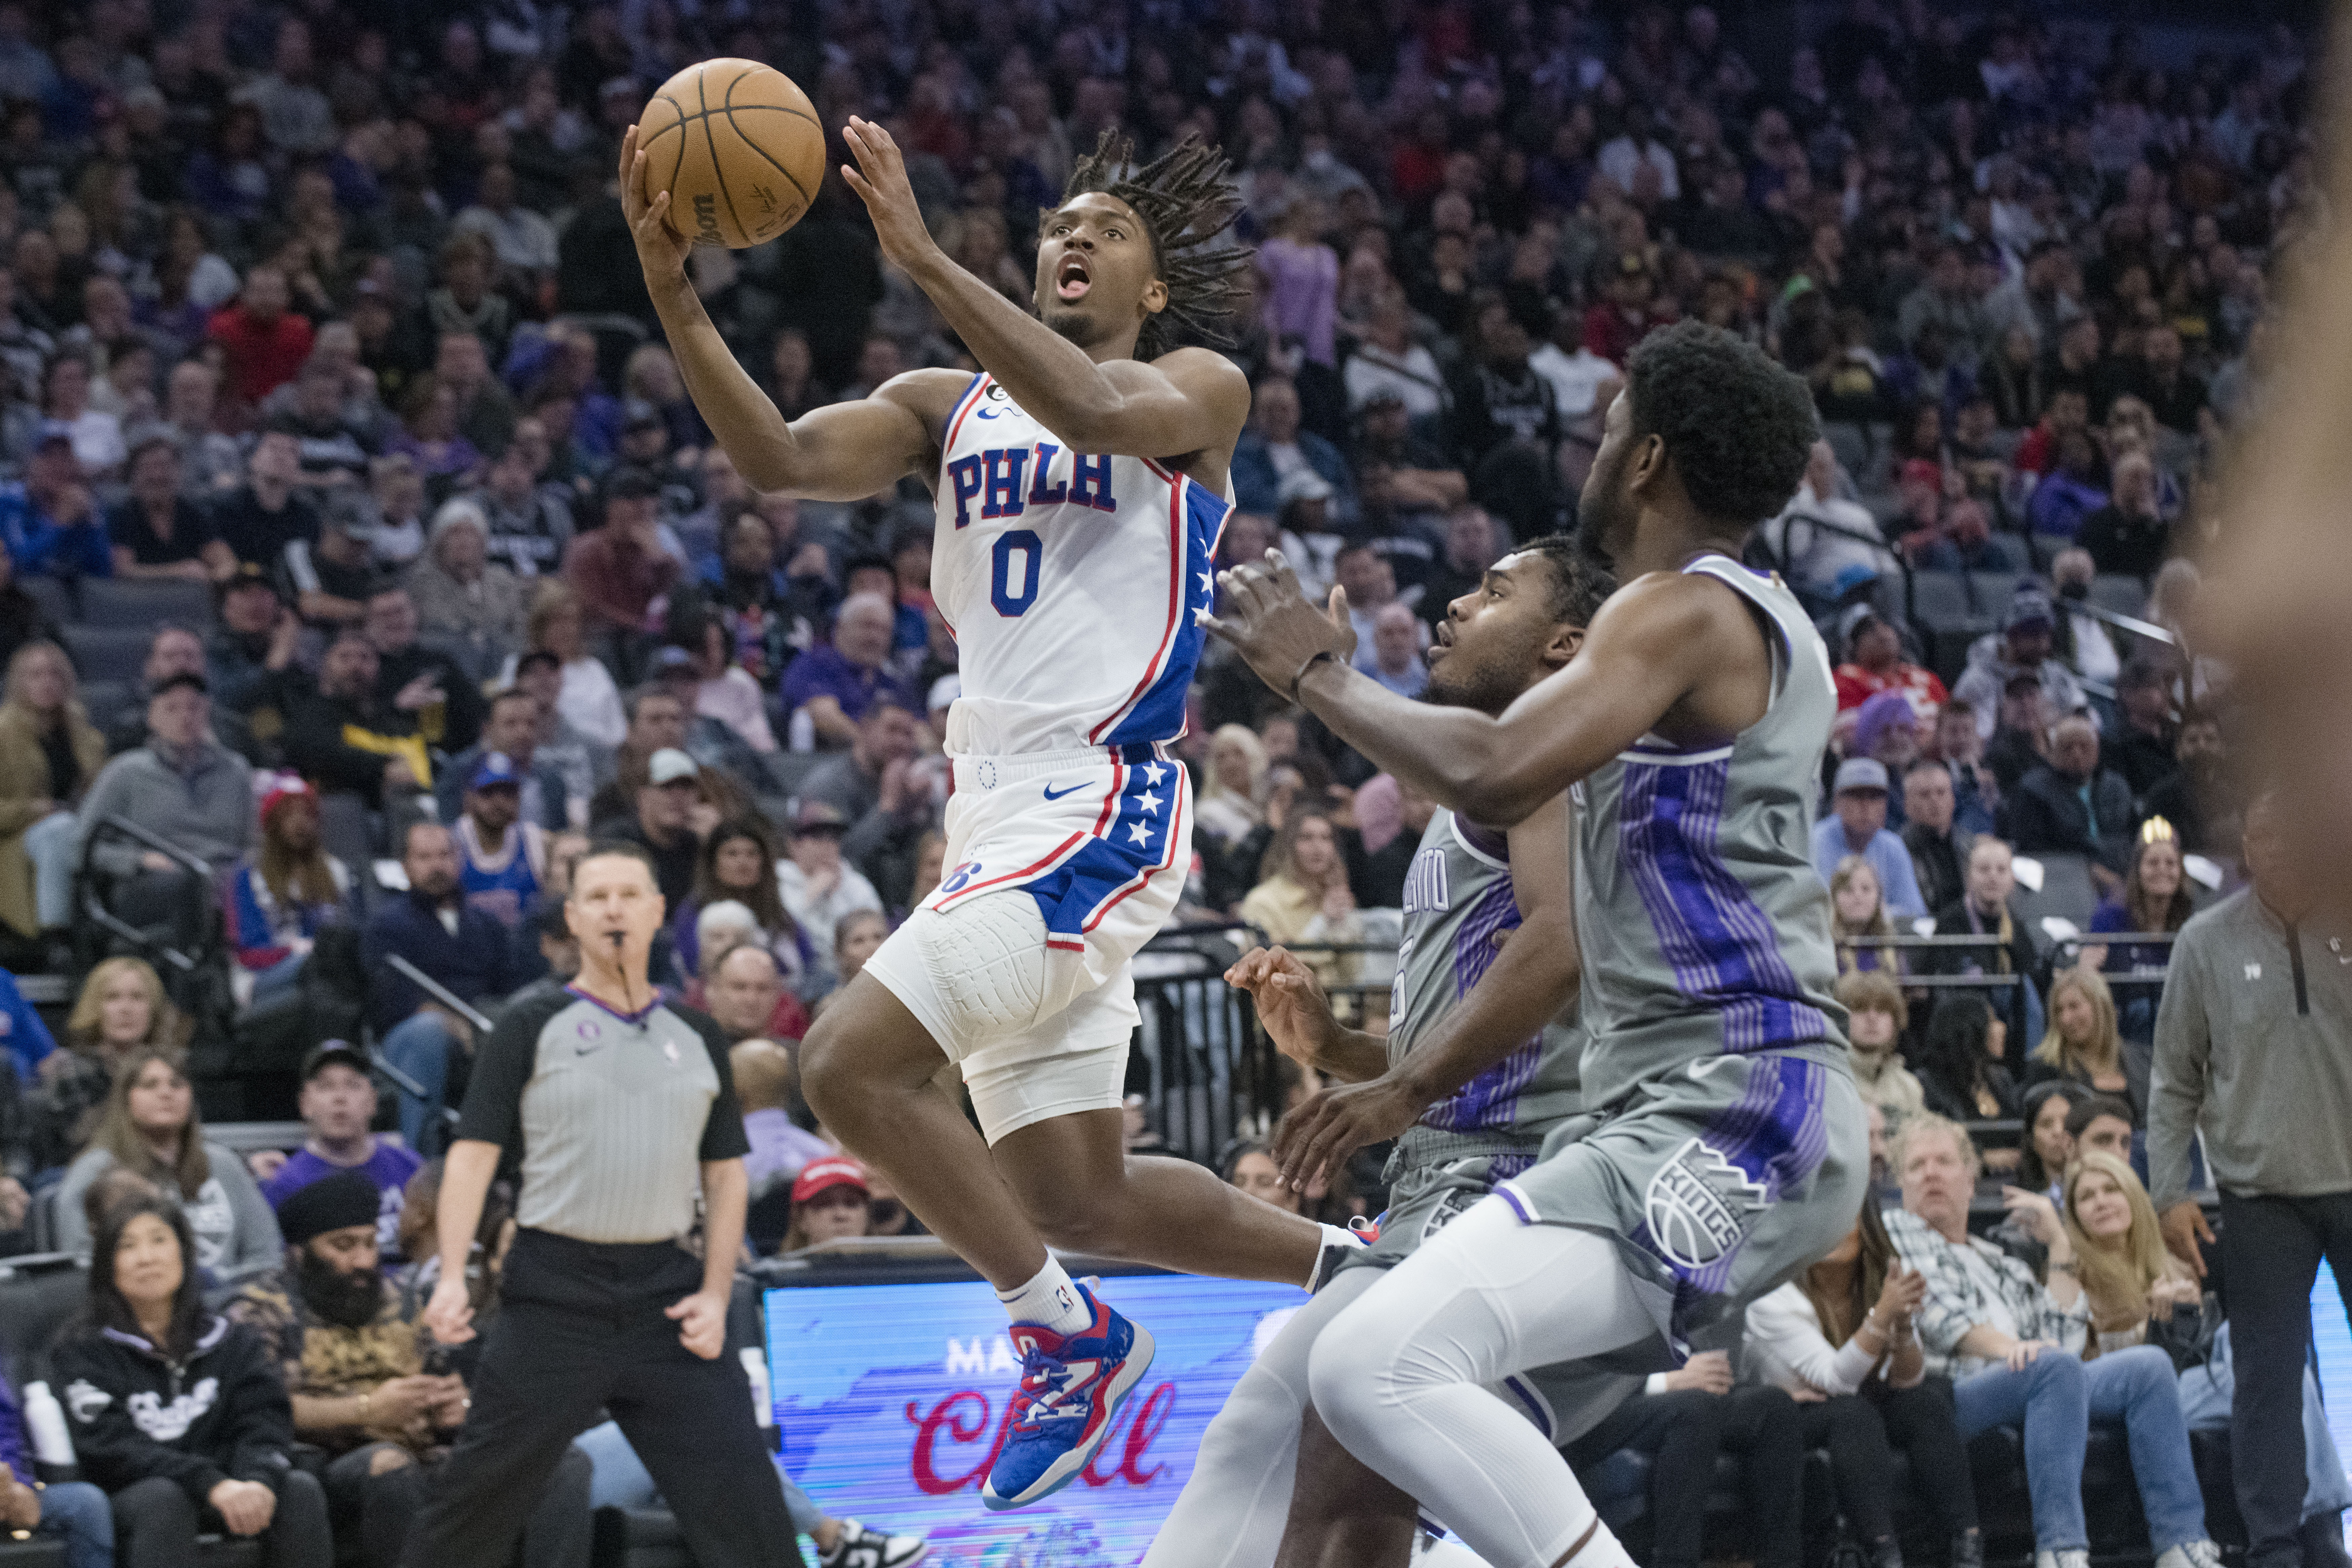 76ers, without Embiid and Harden, edge Kings for 5-0 trip - WHYY